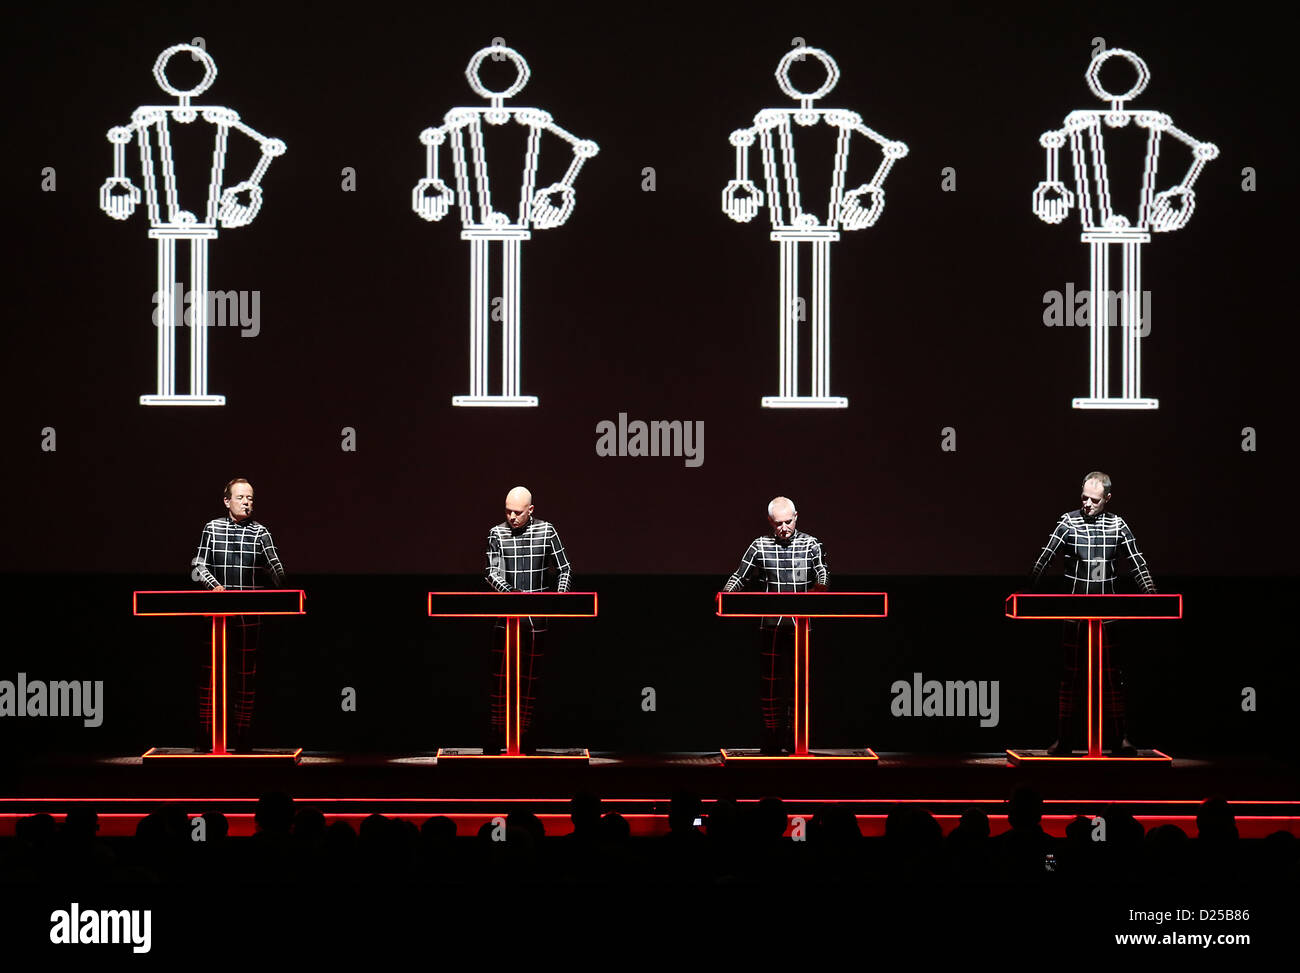 The members of the German electronic band Kraftwerk perform on stage at the arts exhibition venue 'Kunstsammlung Nordrhein-Westfalen' in Duesseldorf, Germany, 11 November 2013. Photo: Oliver Berg Stock Photo